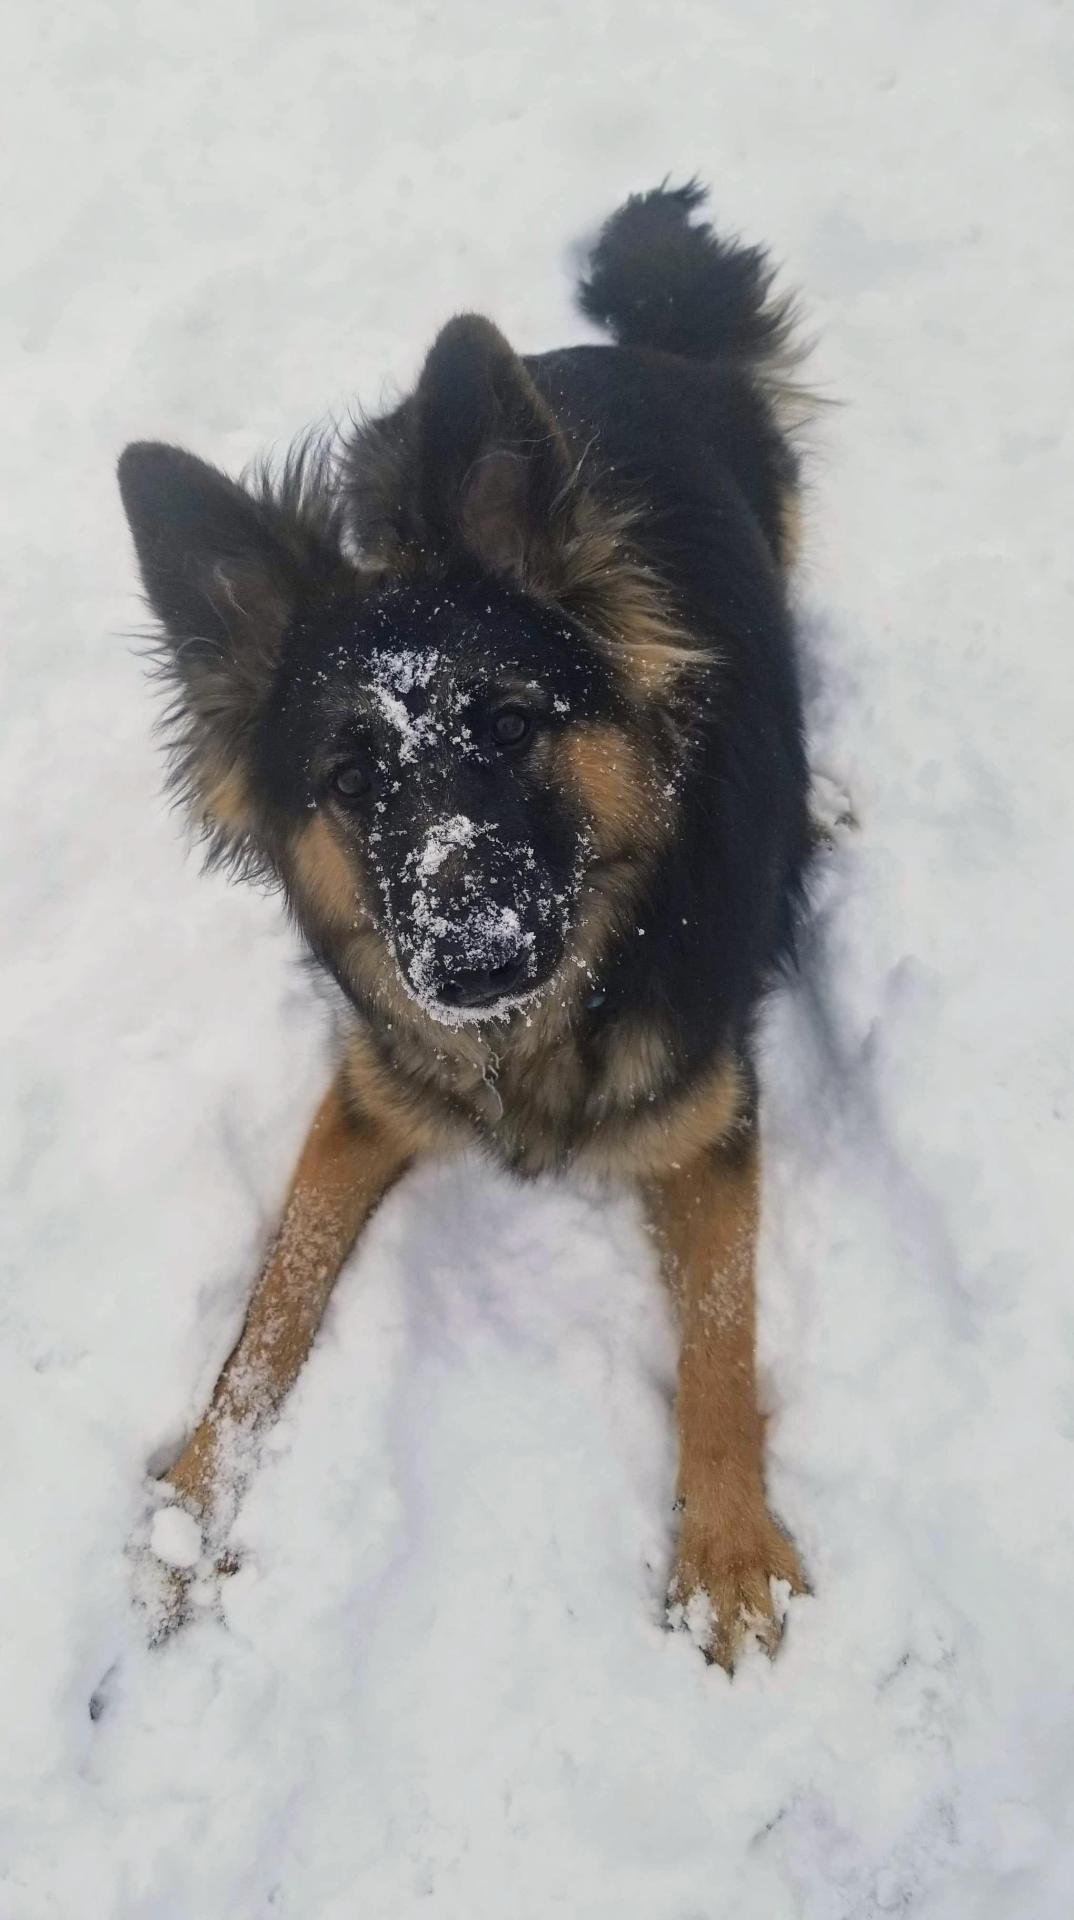 Soji's First Snow. She may look like a doggo but she's still an 8 month pupper.